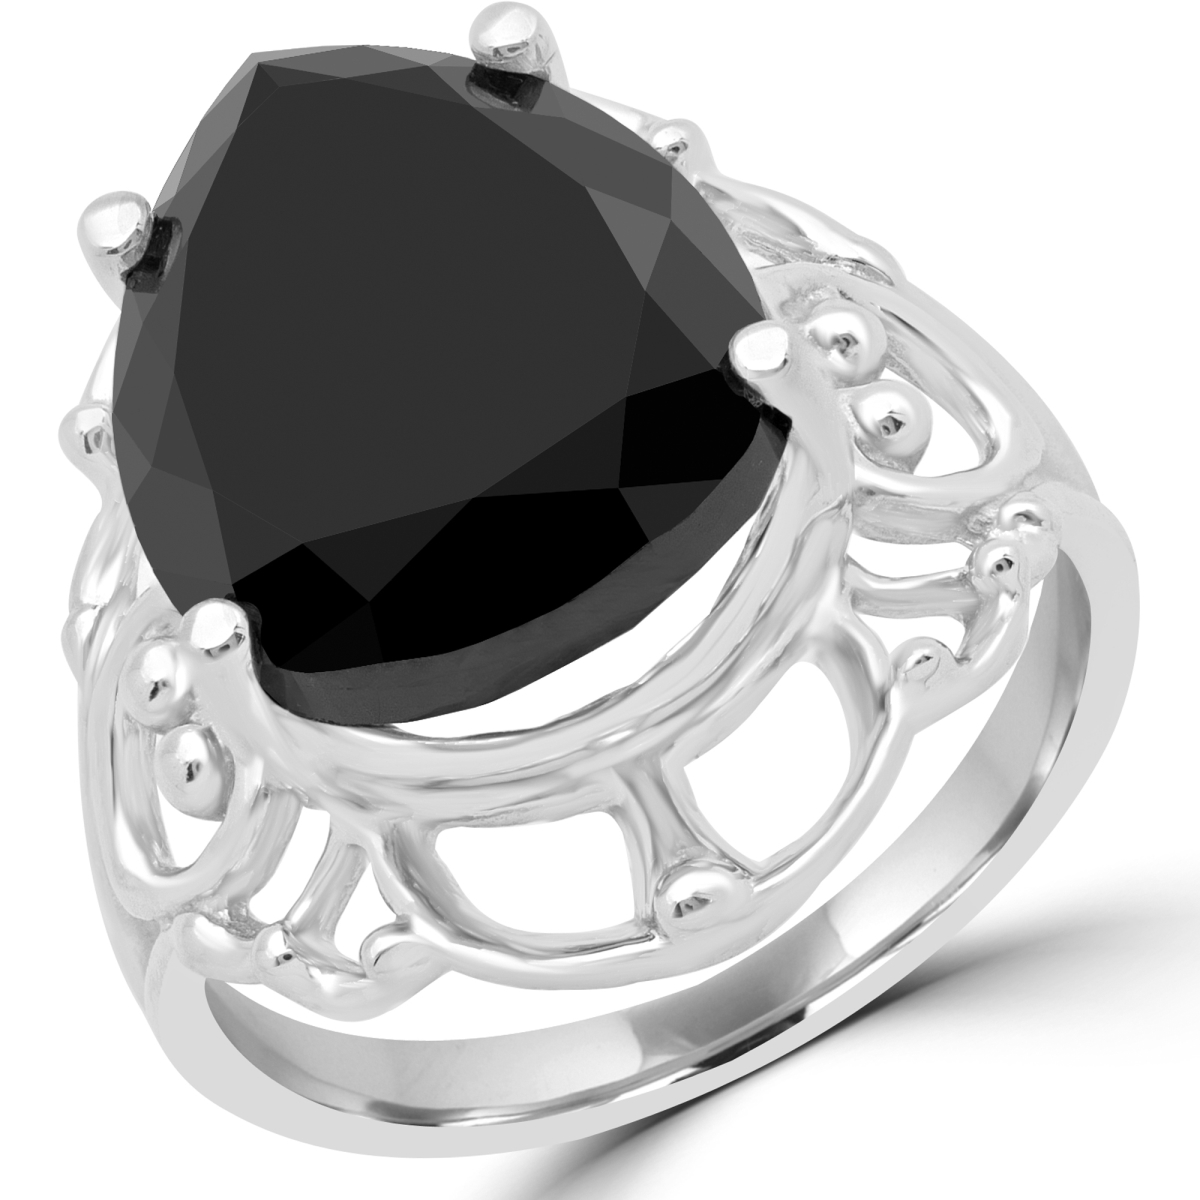 Picture of Majesty Diamonds MD180587-P 8 CT Pear Black Diamond Solitaire Engagement Ring in 14K White Gold